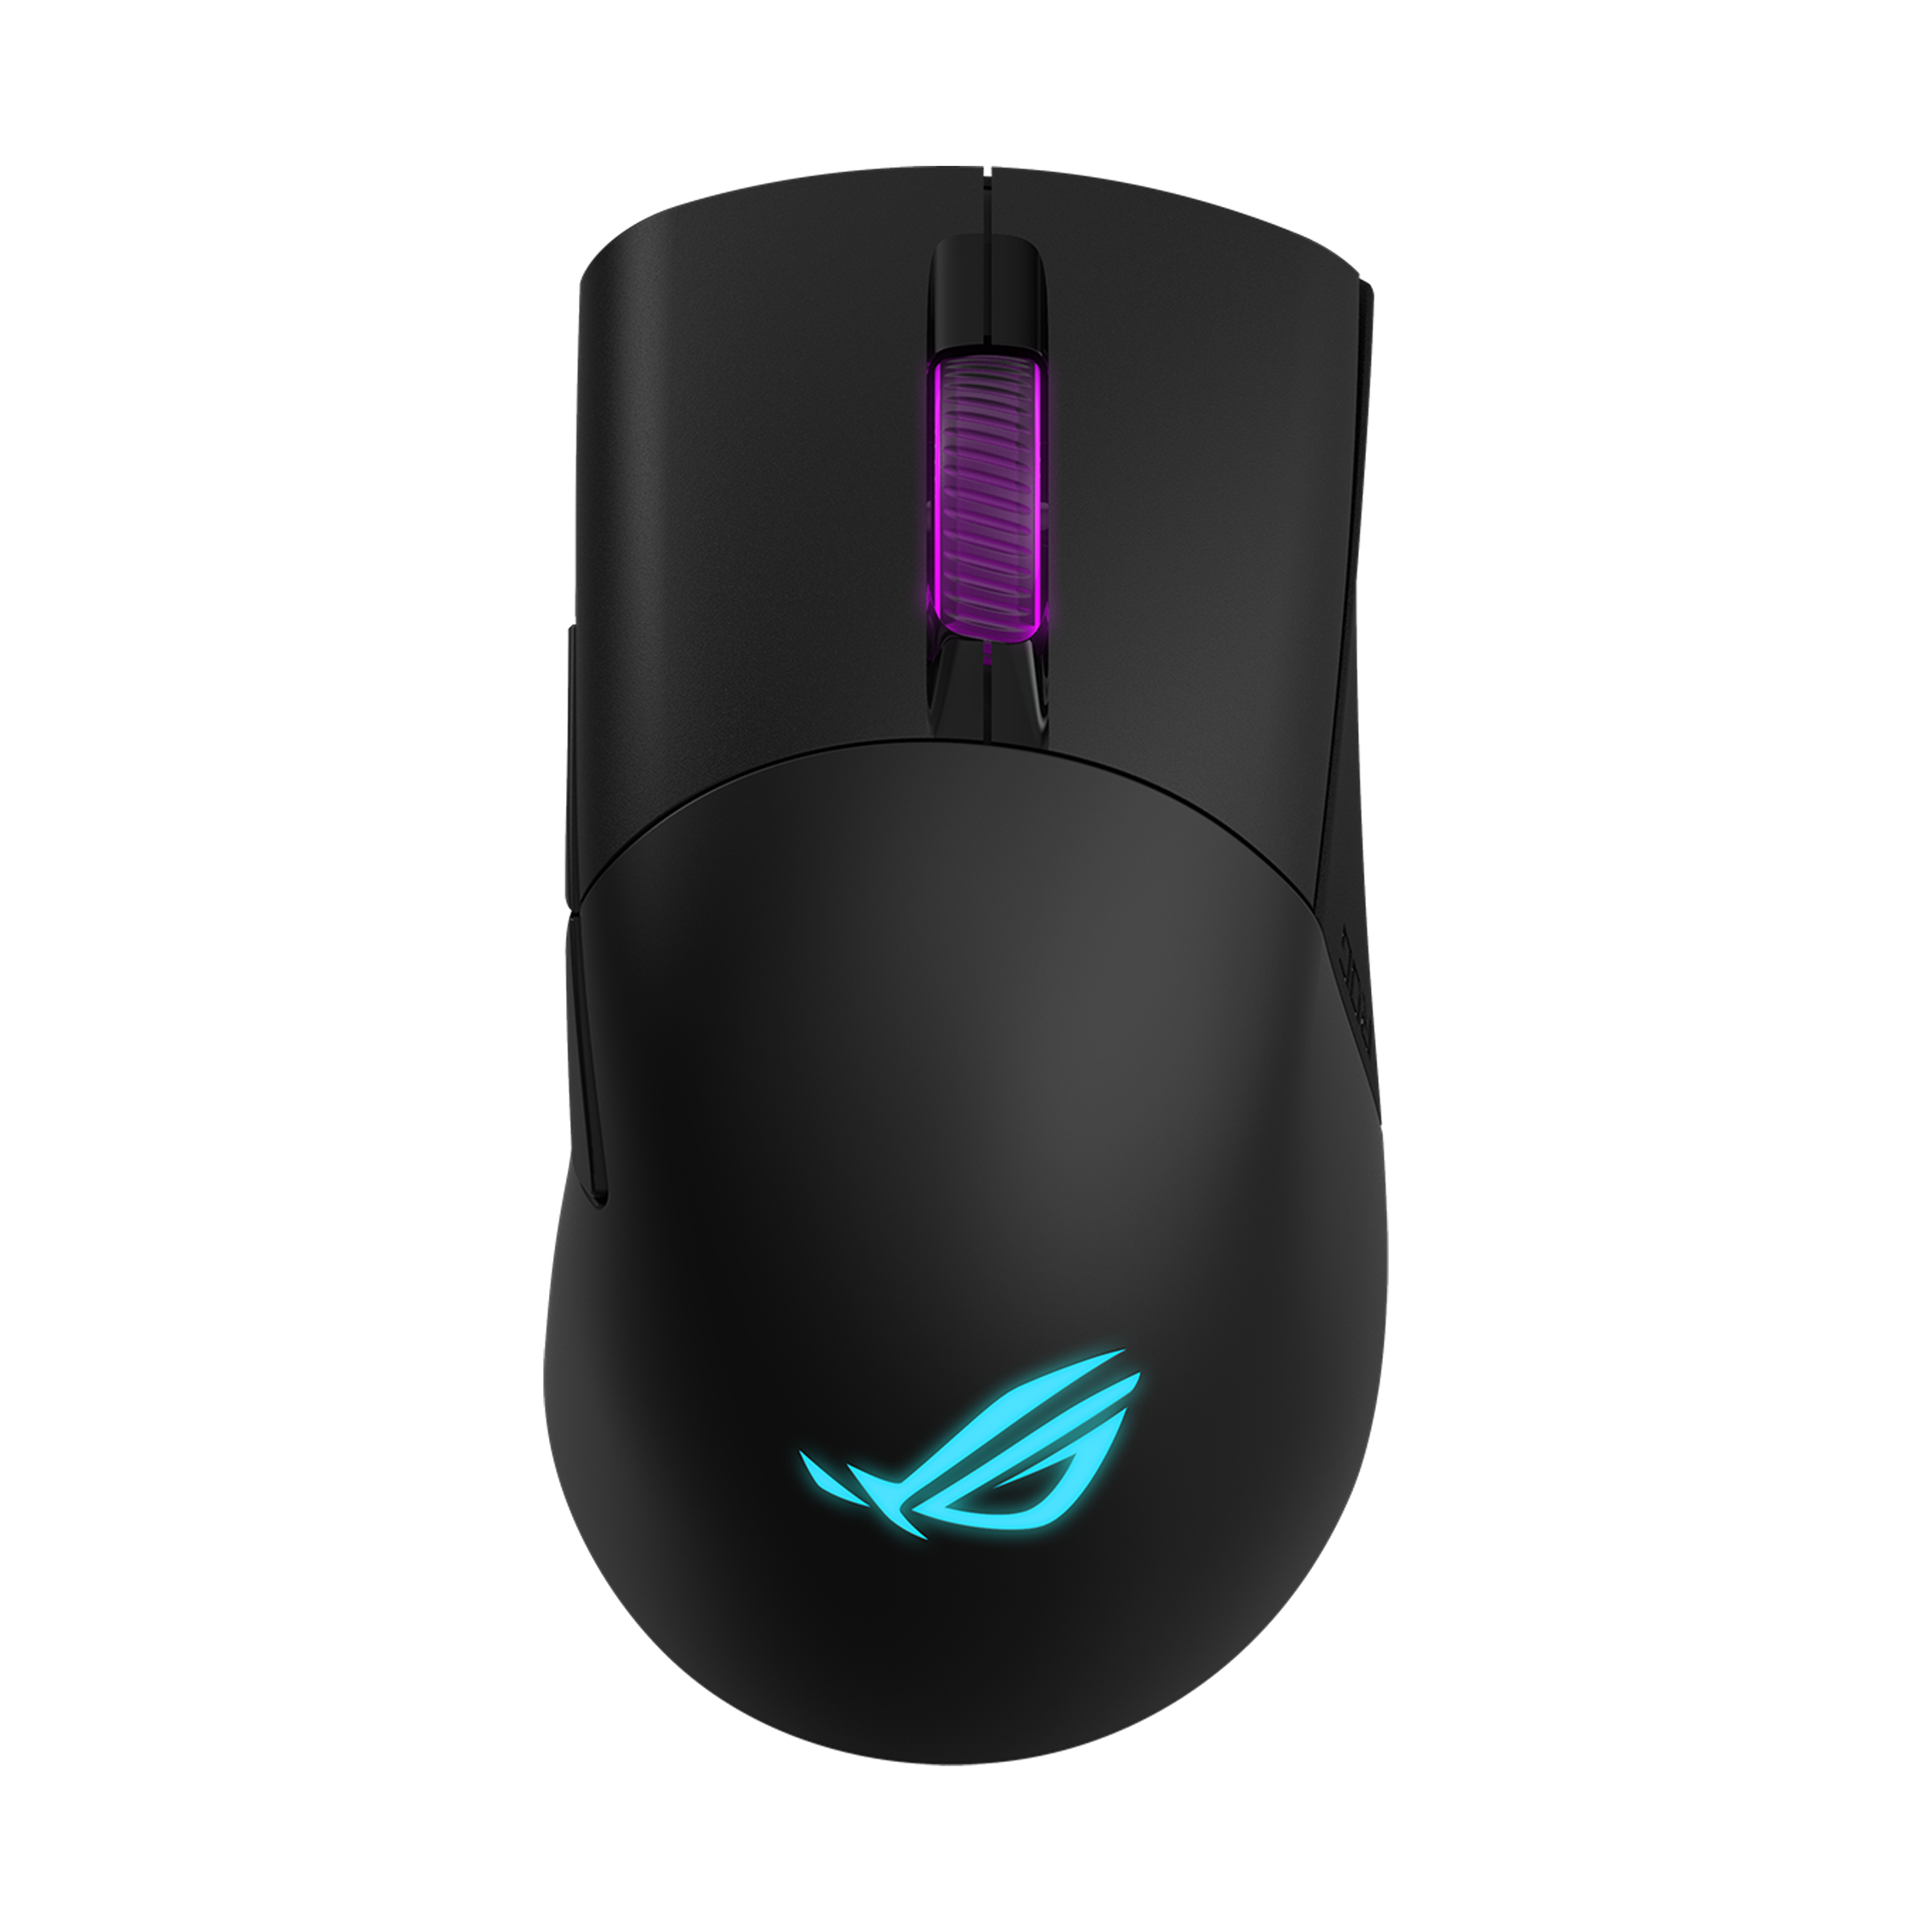 Should I get medium or small ultralight x? : r/MouseReview